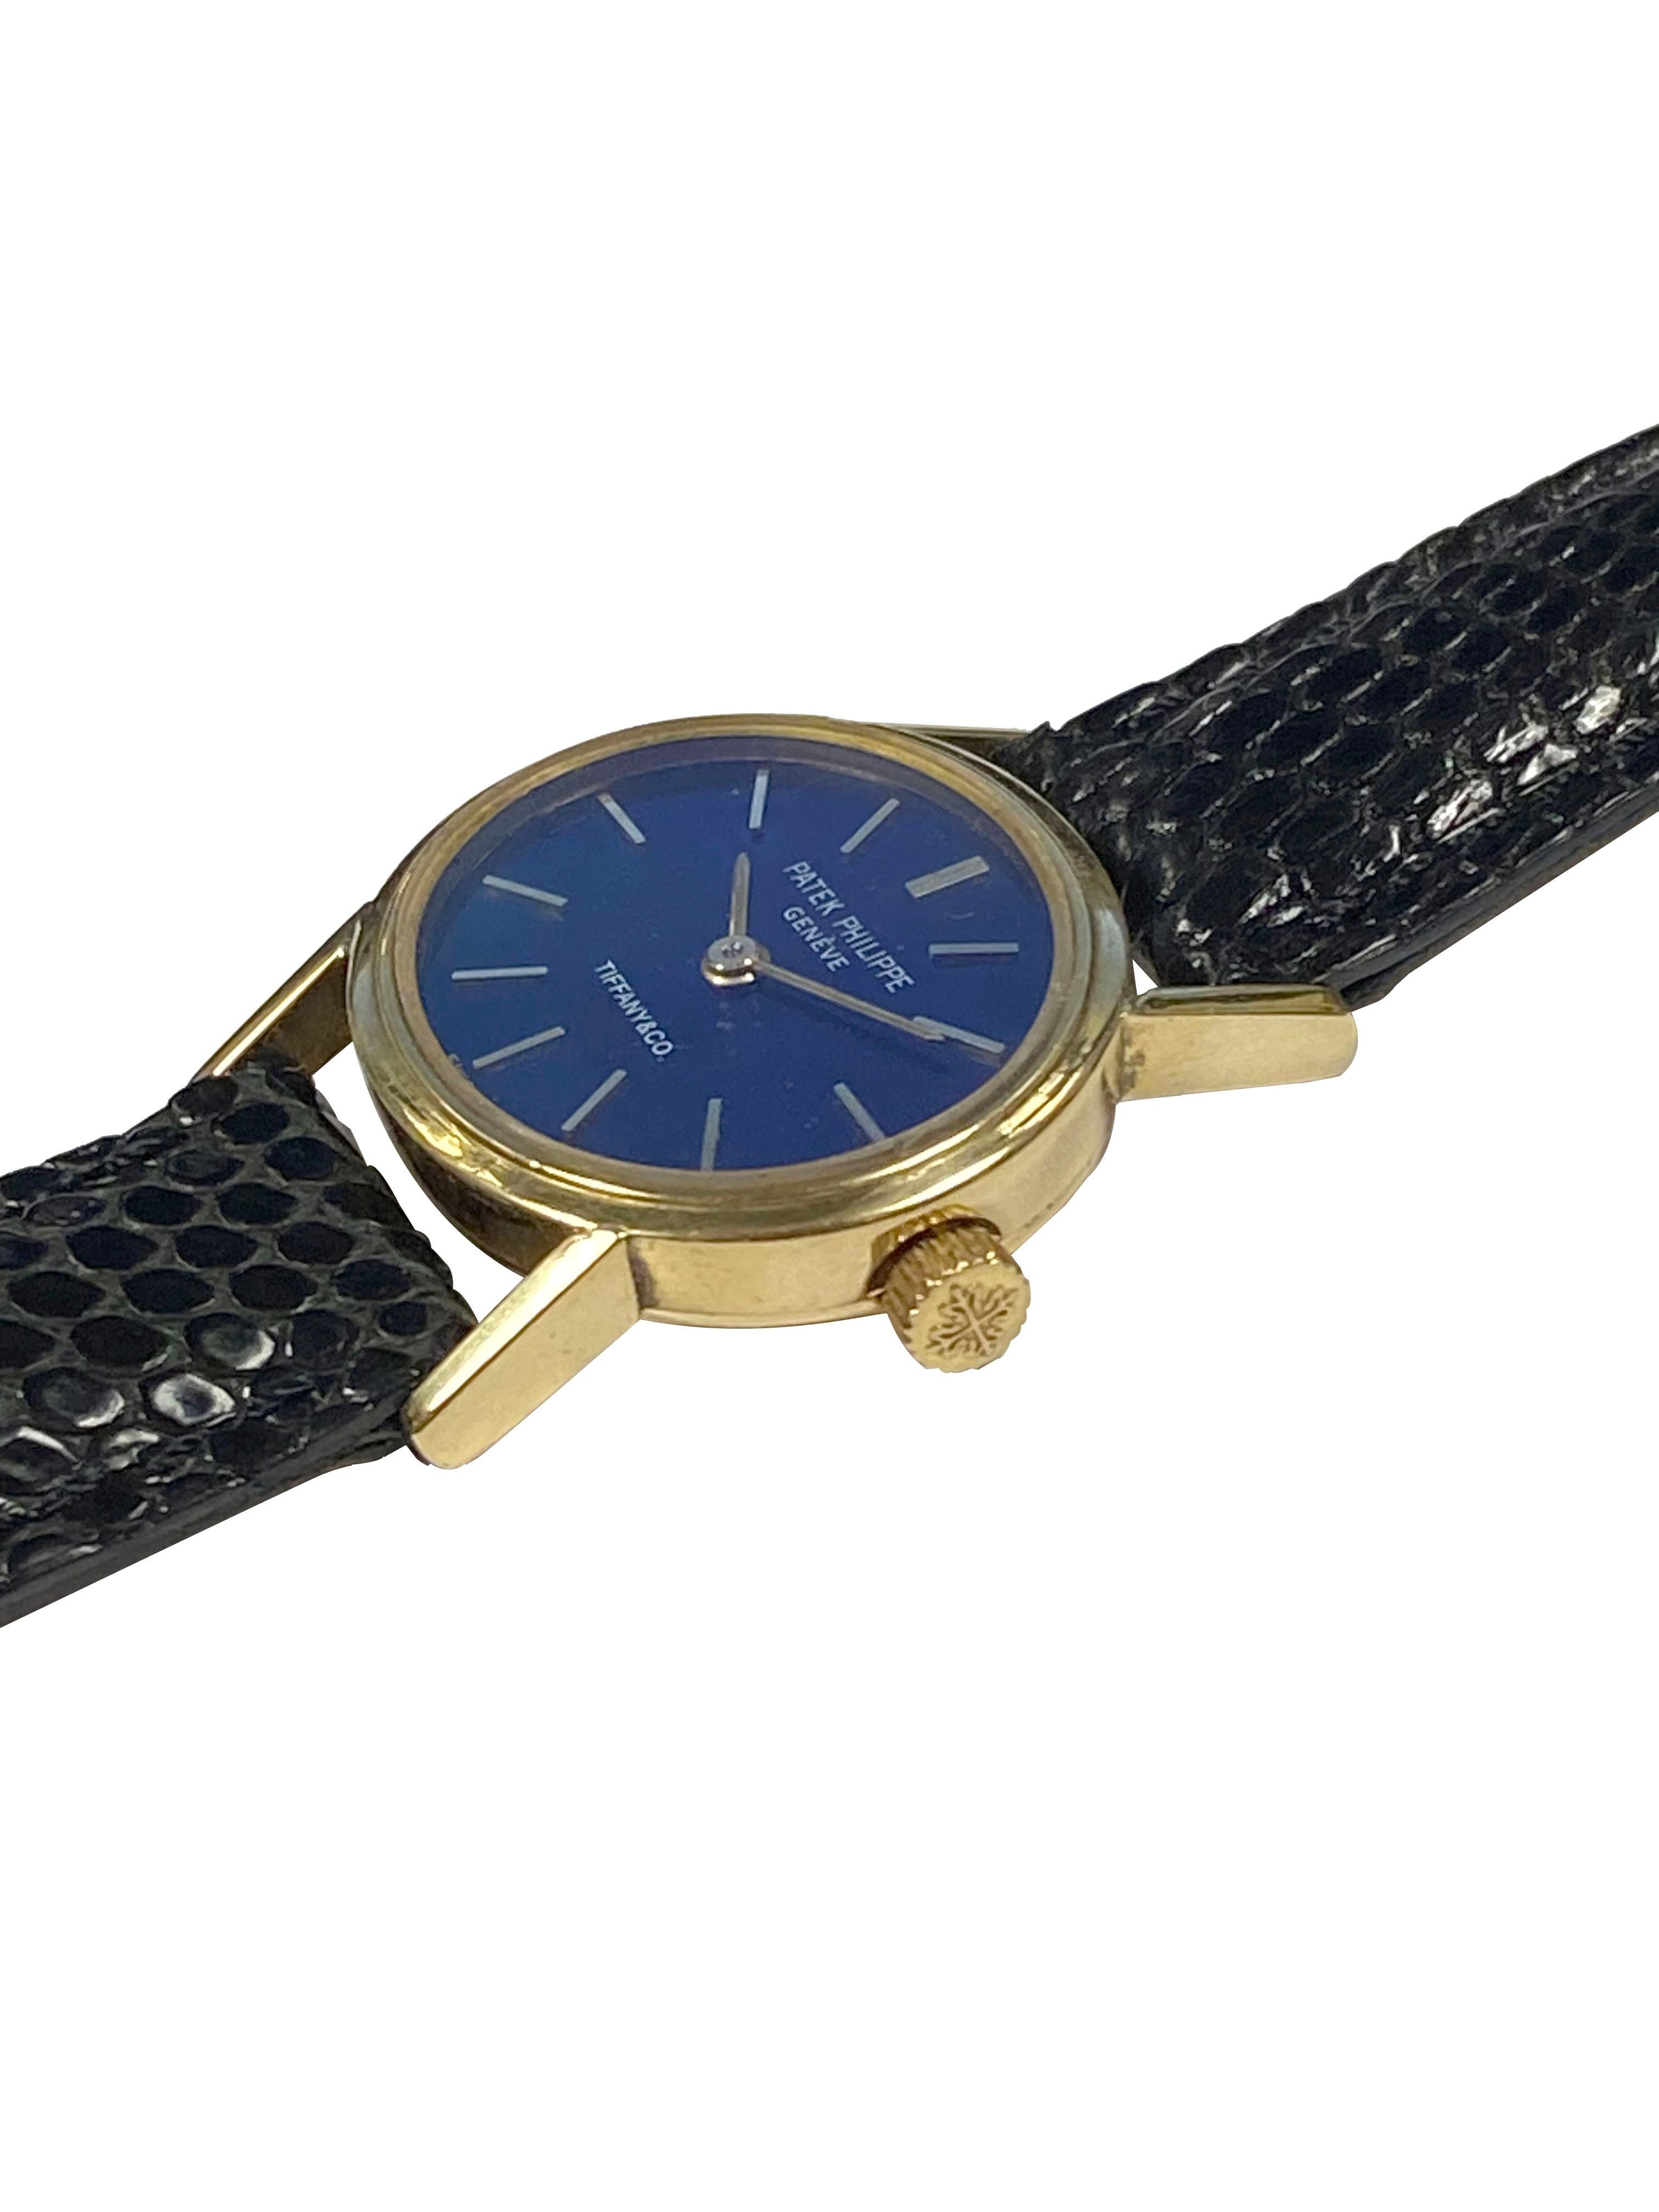 Circa 1980 Ladies Patek Philippe Reference 3349  for Tiffany & Company, 22 x 19 M.M. 18k Yellow Gold 2 piece case, 20 Jewel, mechanical, manual wind nickle lever movement. Patek Philippe logo crown. Blue Gloss dial with raised Gold markers. New